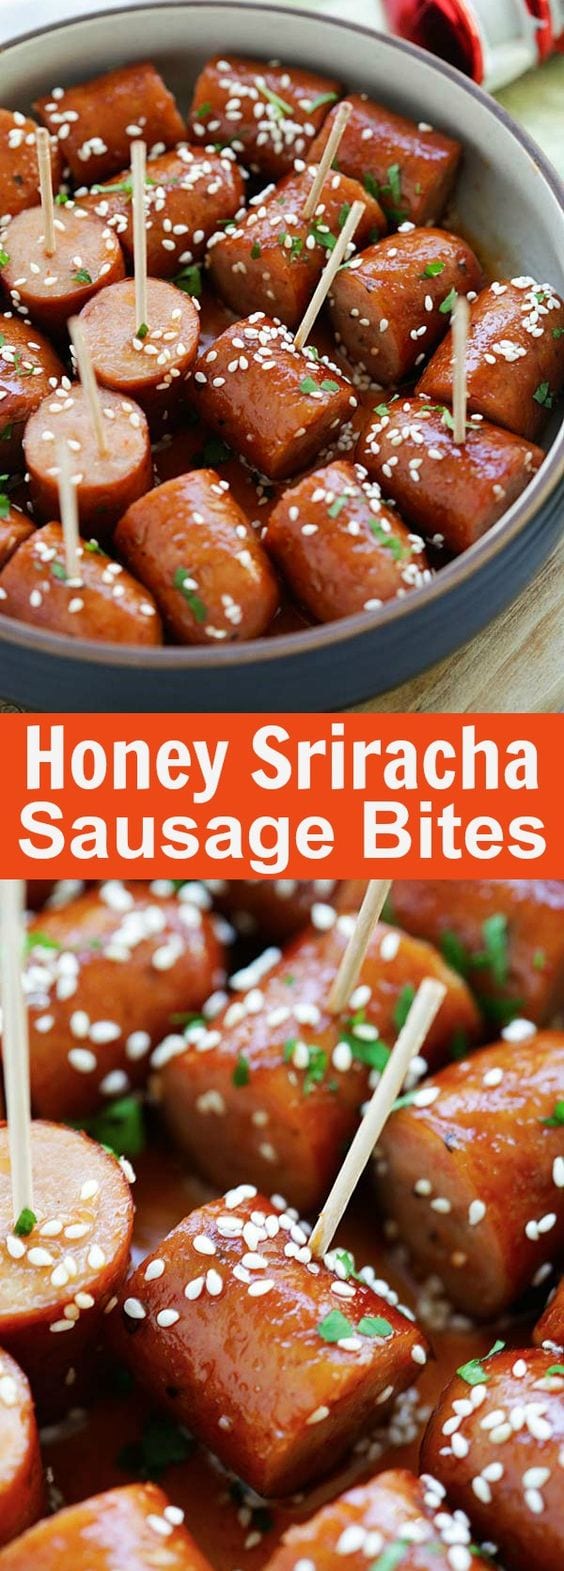 Honey Sriracha Sausage Bites - sticky, sweet and spicy sausage bites with honey sriracha sauce. An easy delicious appetizer that is a crowd pleaser | rasamalaysia.com